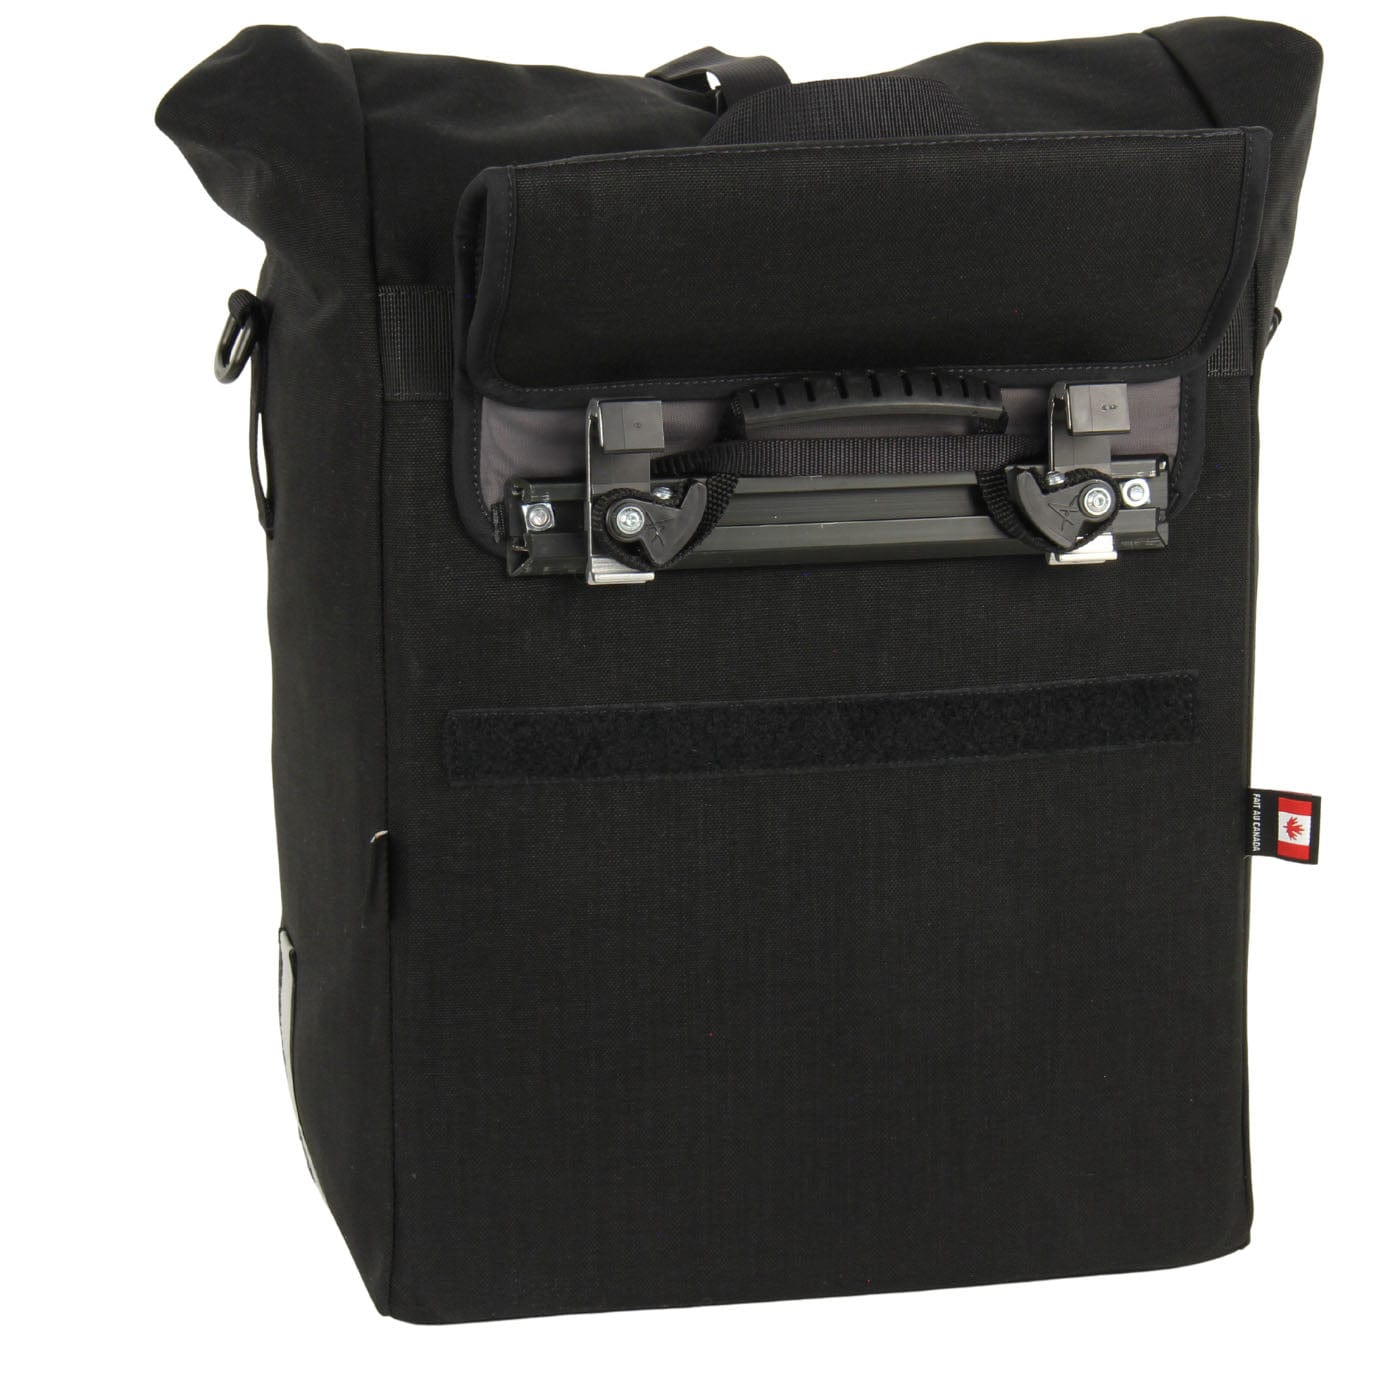 Signature V waterproof urban laptop pannier with Cam-Lock padded flap folded up ready to be mounted to the bike rack